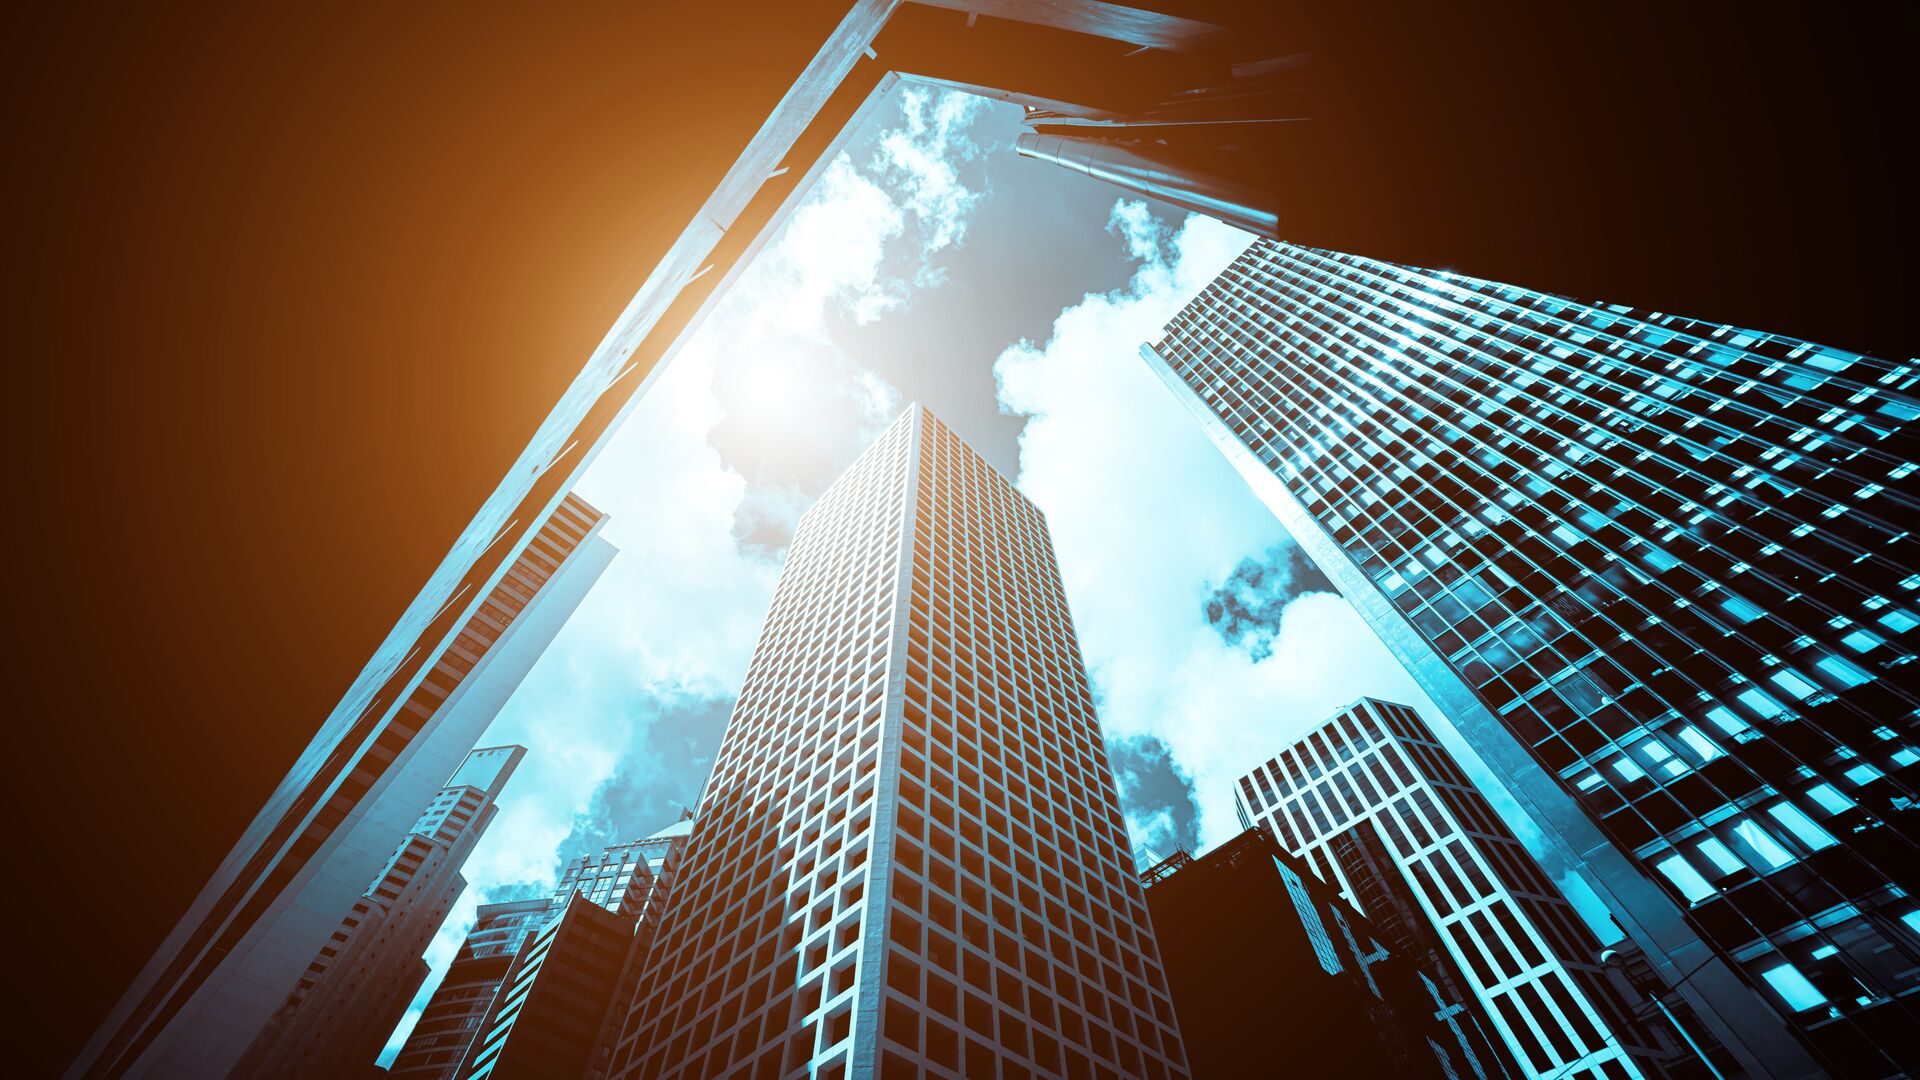 Concept for raising capital, looking above from street level upon a metropolis of large sky scrapers cast in sun. Jeb Altonaga, Founder of Clearglass Capital Partners & Cowen's own Amy Cheung discuss the soft skills involved in raising capital.